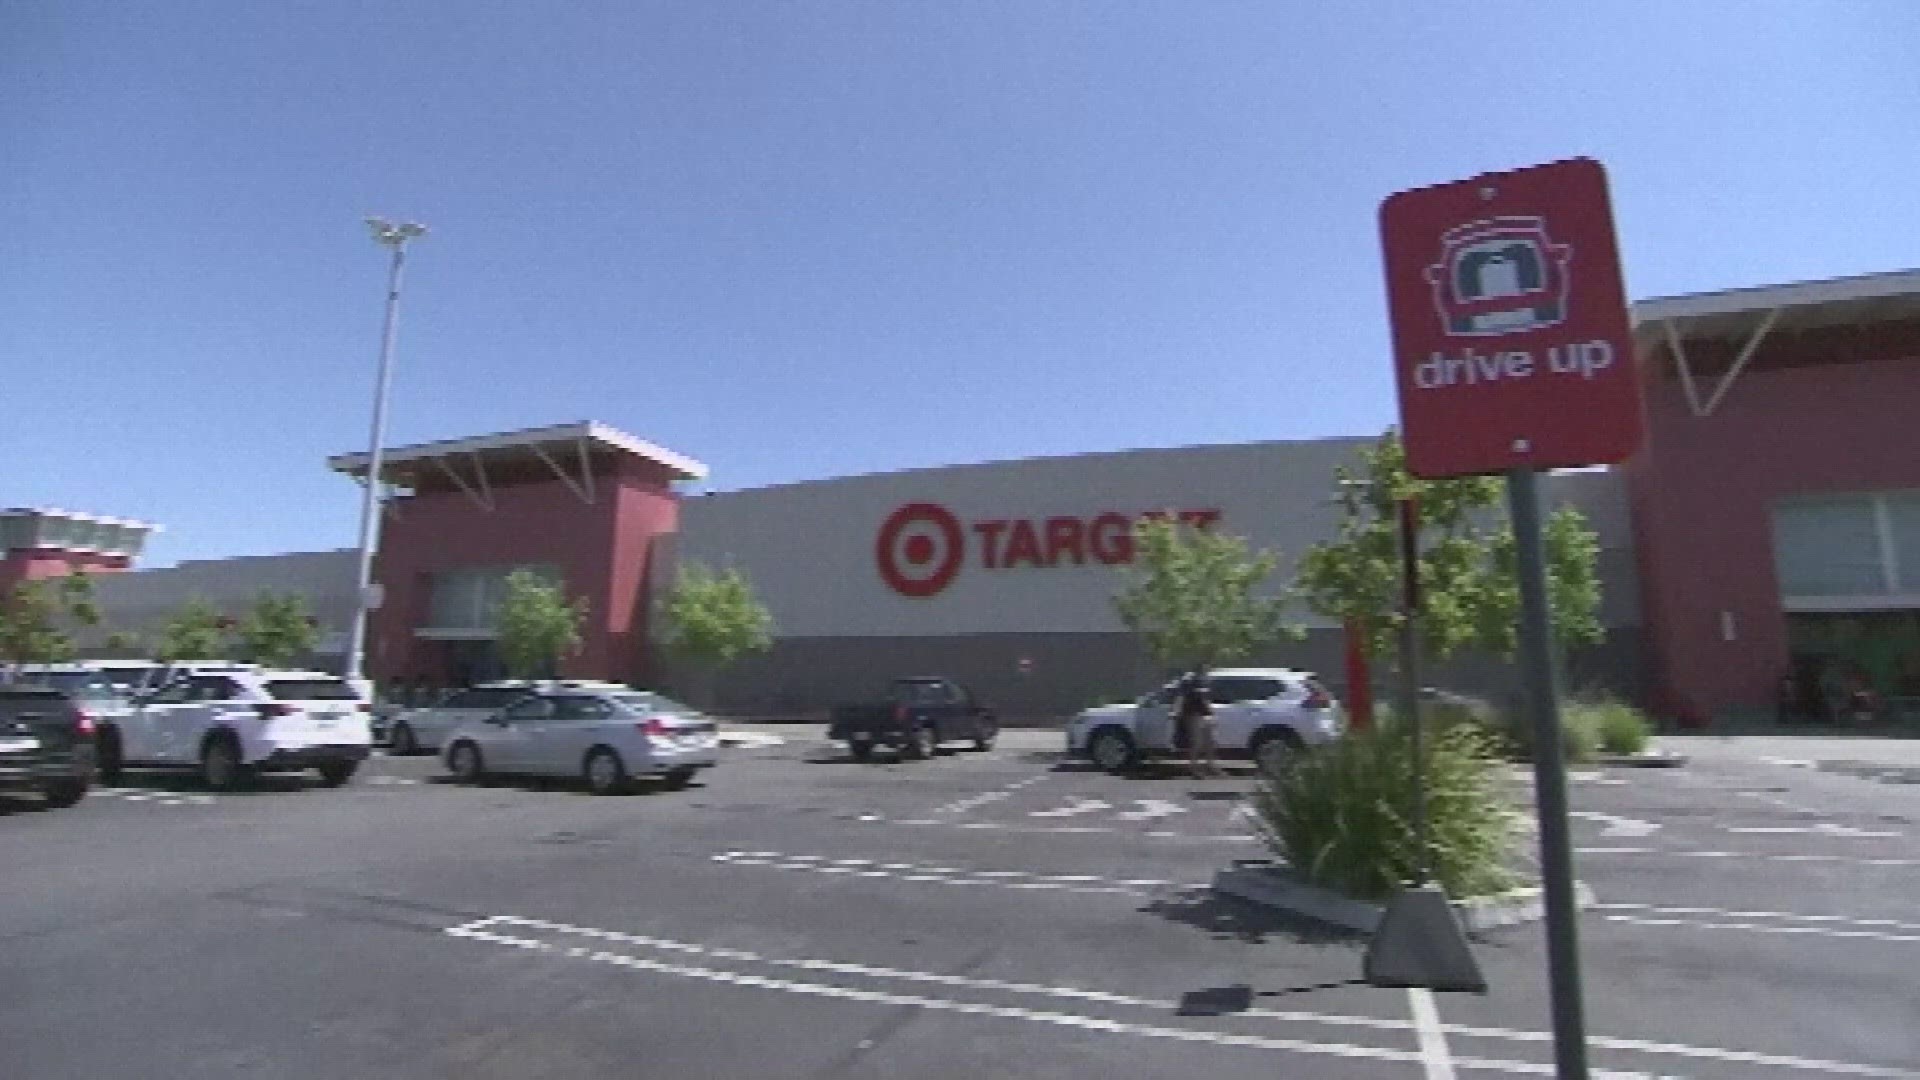 Target and Amazon plan to add over 100,000 jobs each.